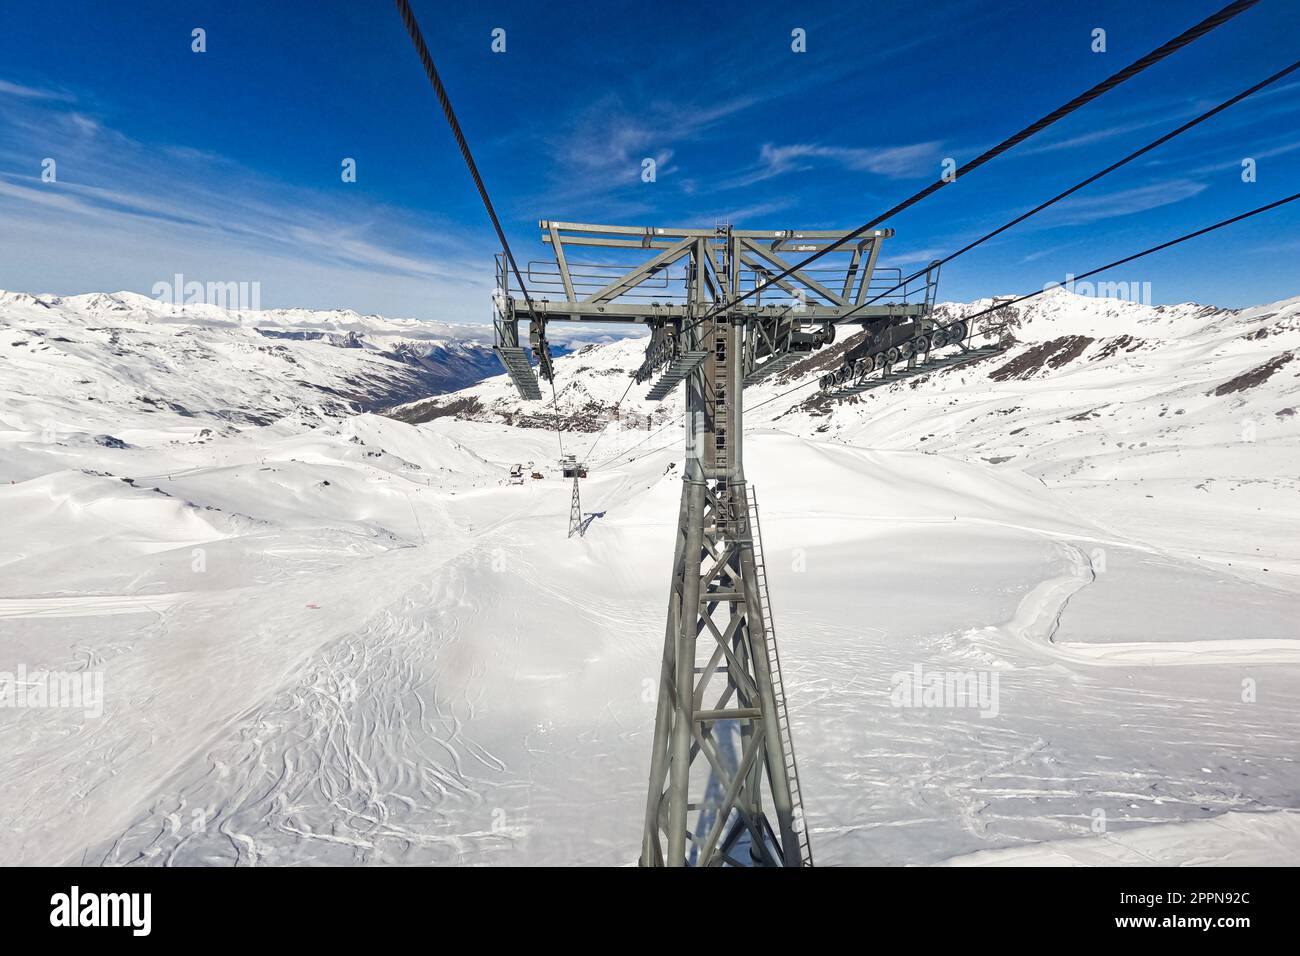 Chairlift post at the top of a snowy mountain above the Val Thorens ski resort in the French Alps Stock Photo